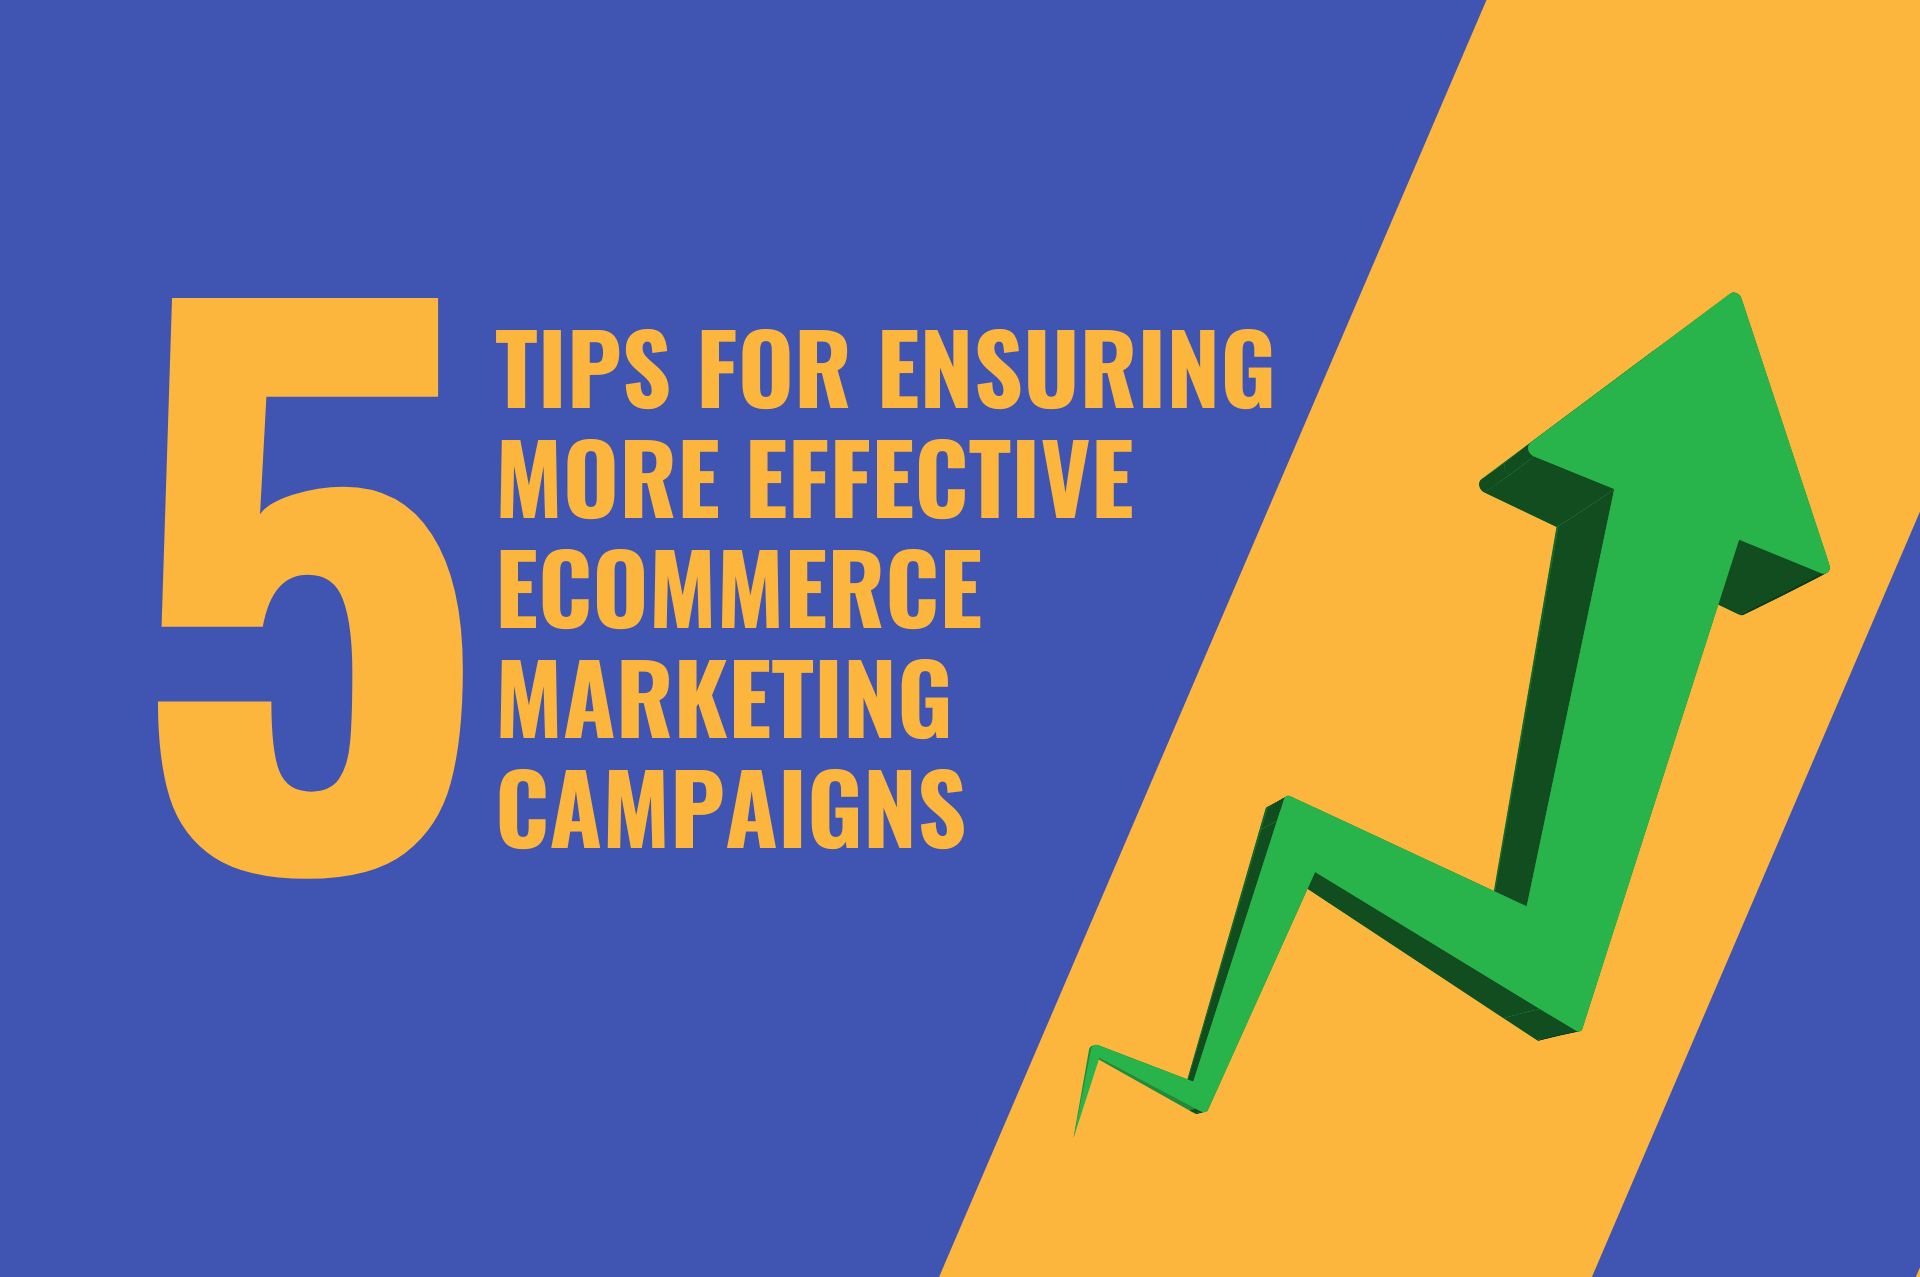 5 Tips for Ensuring More Effective eCommerce Marketing Campaigns